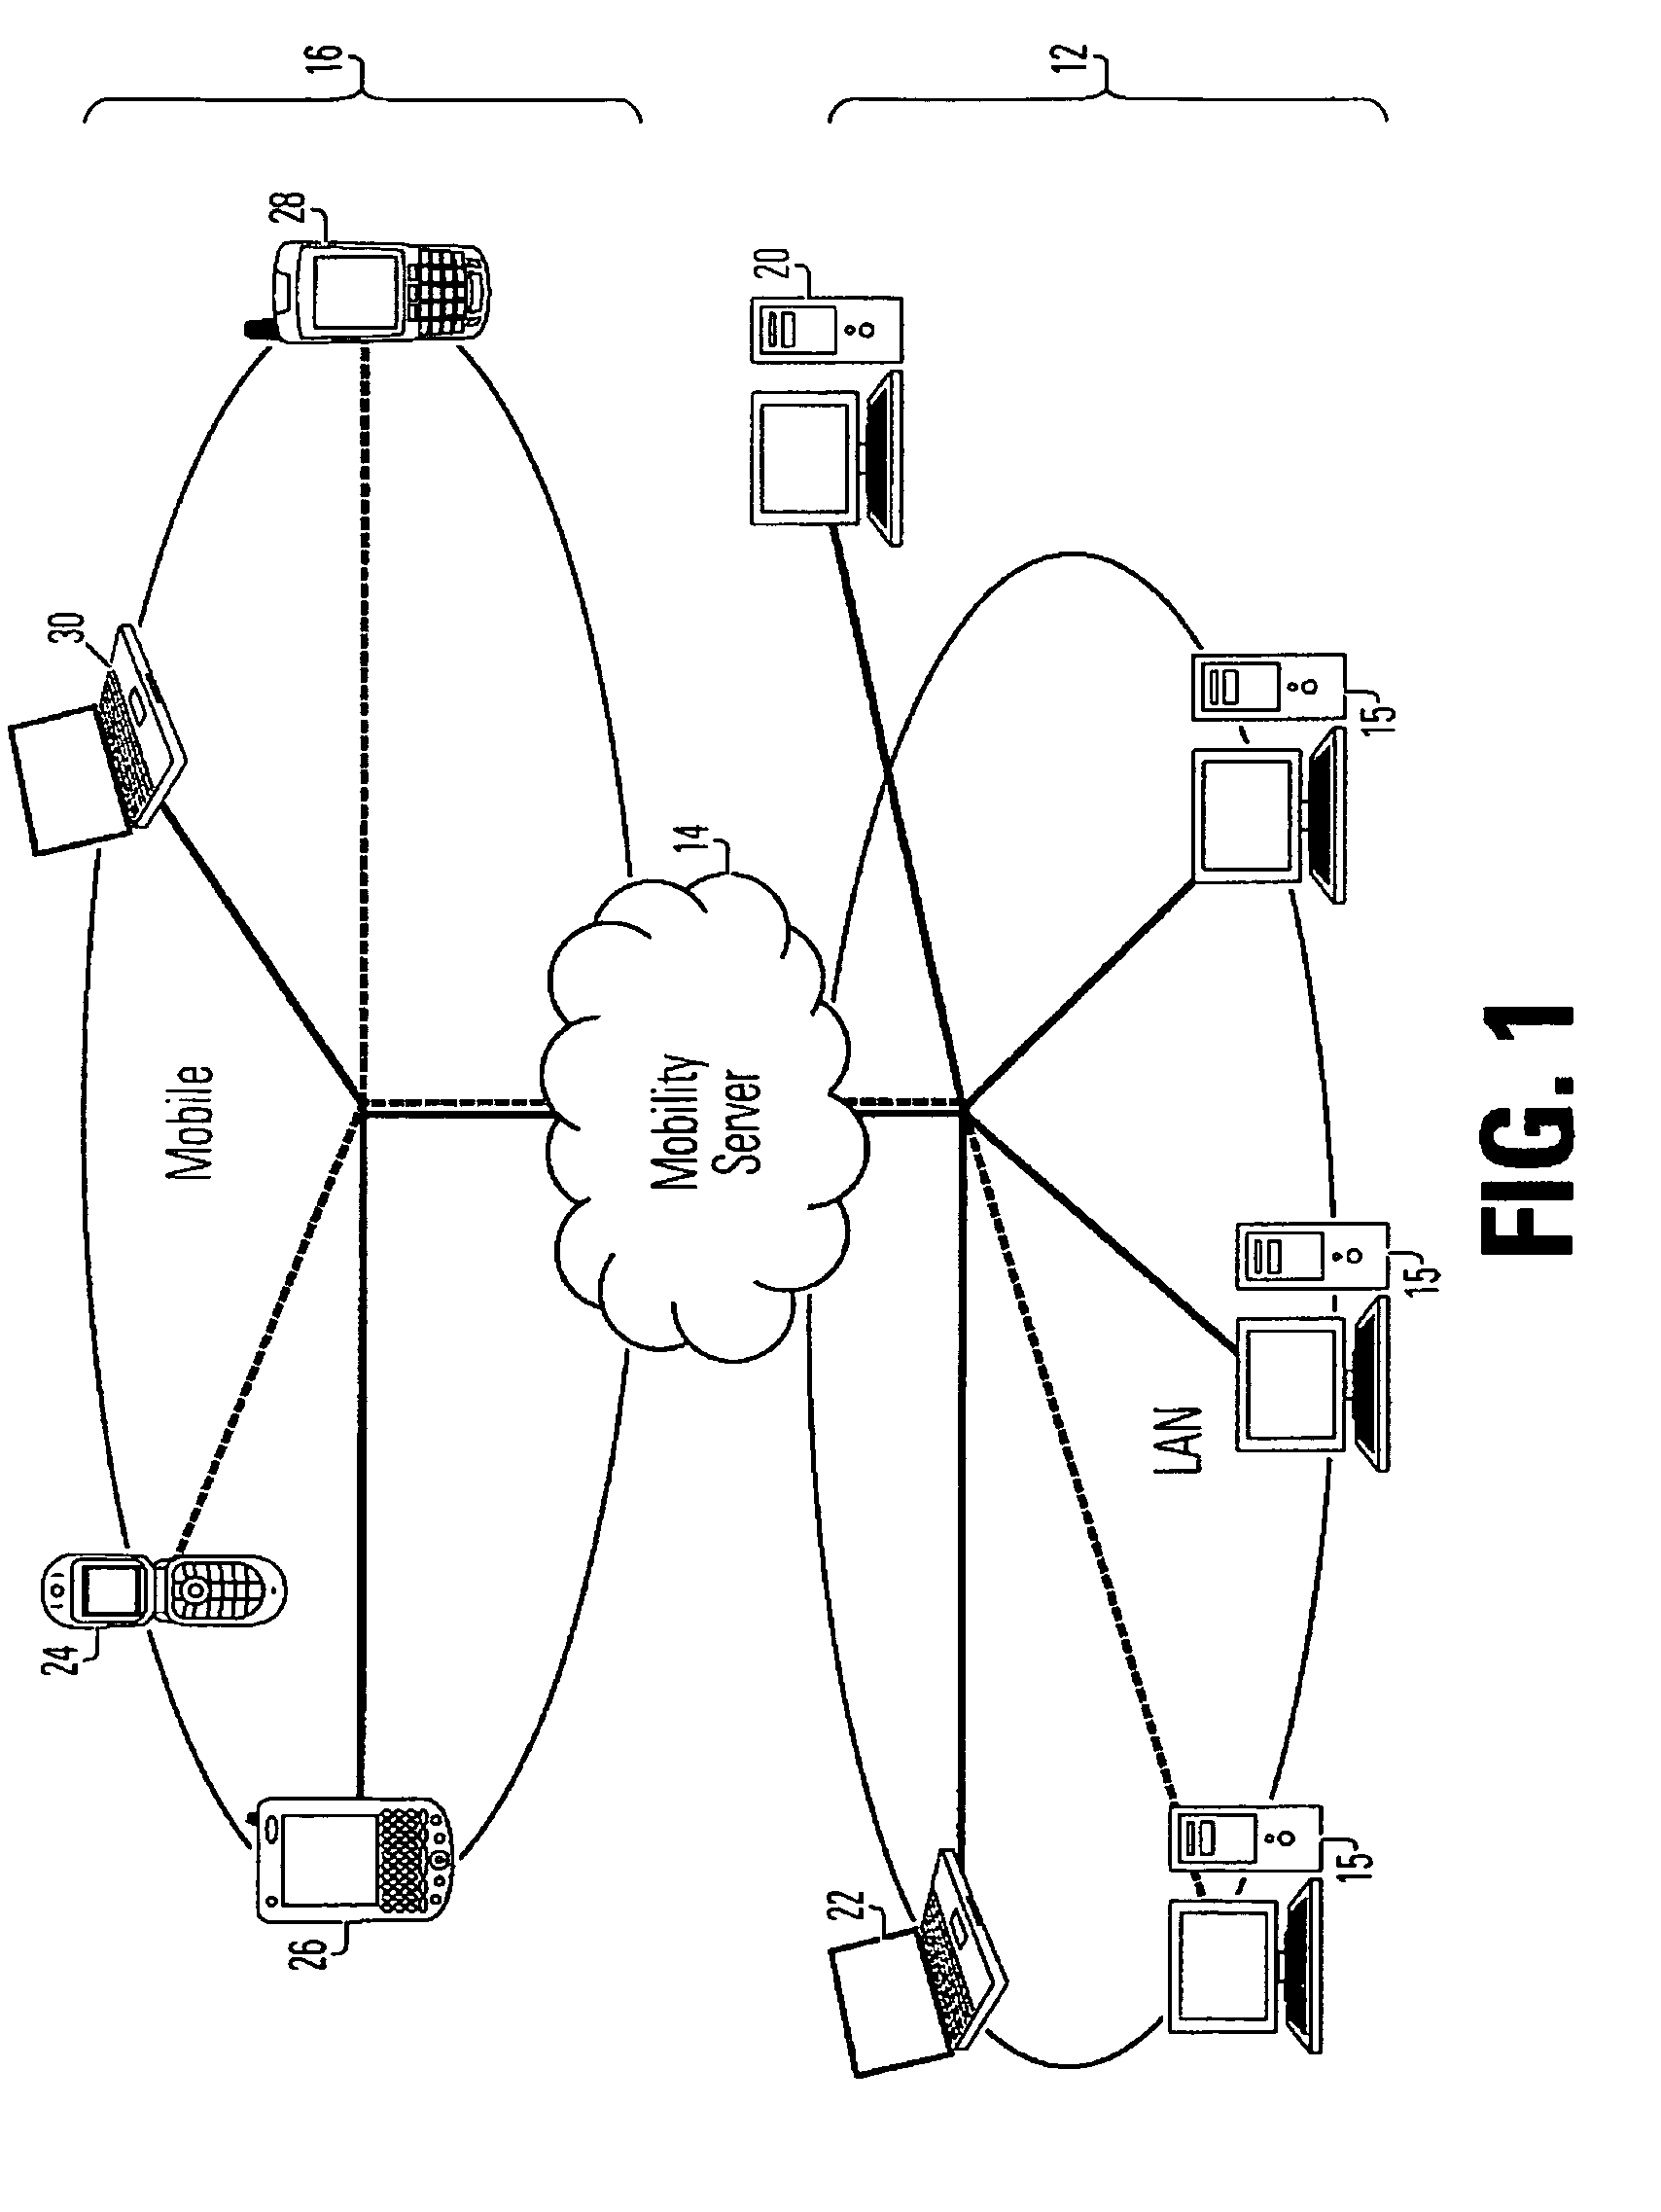 Network adapted for mobile devices